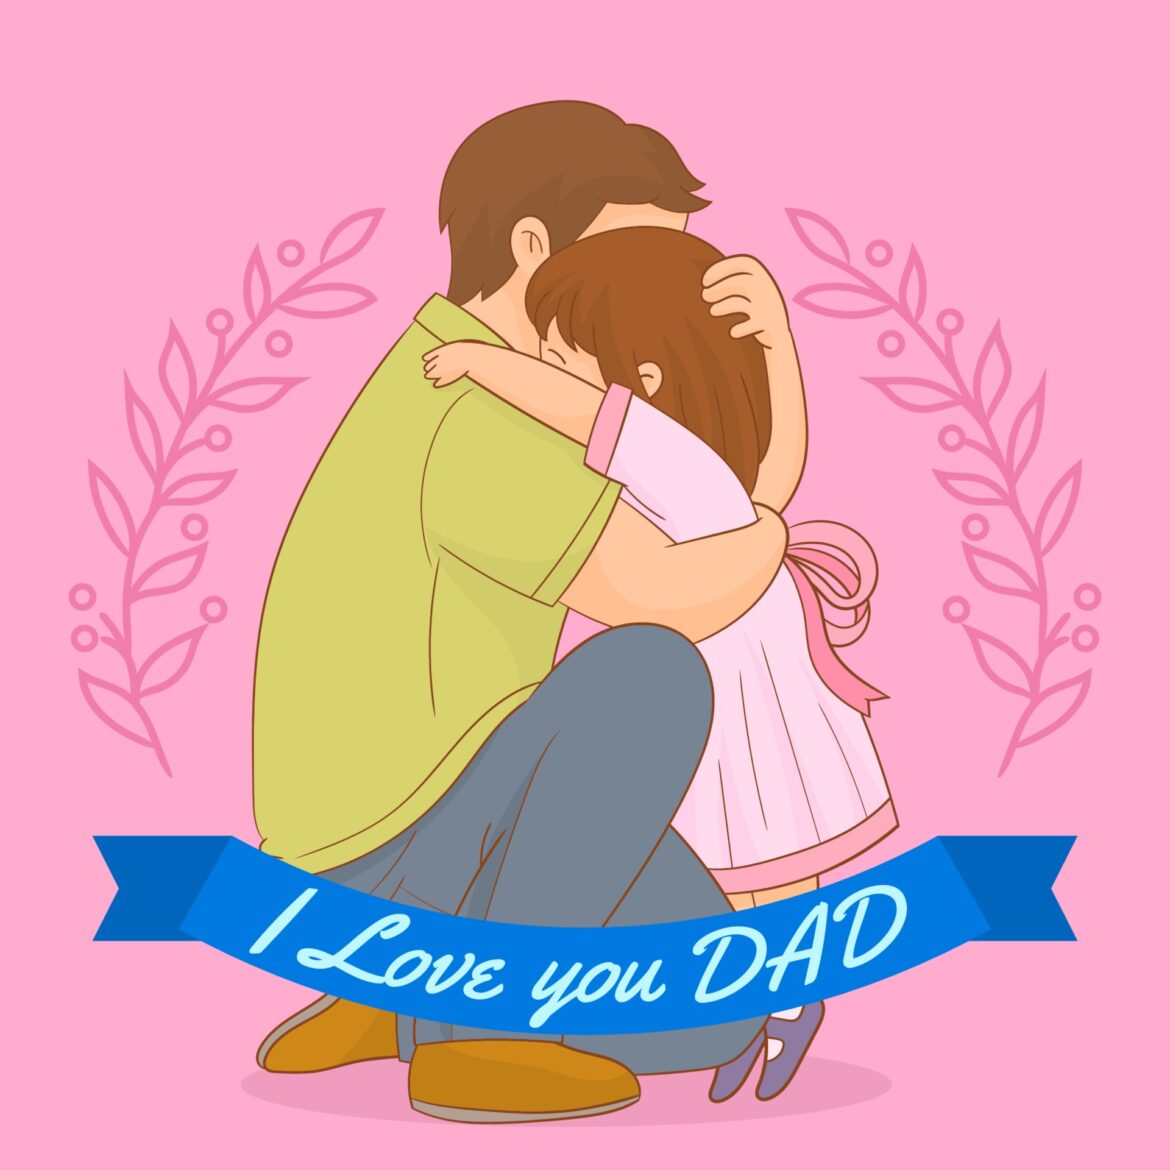 Top Ten Things My Dad Has Taught Me (Father’s Day Special:)